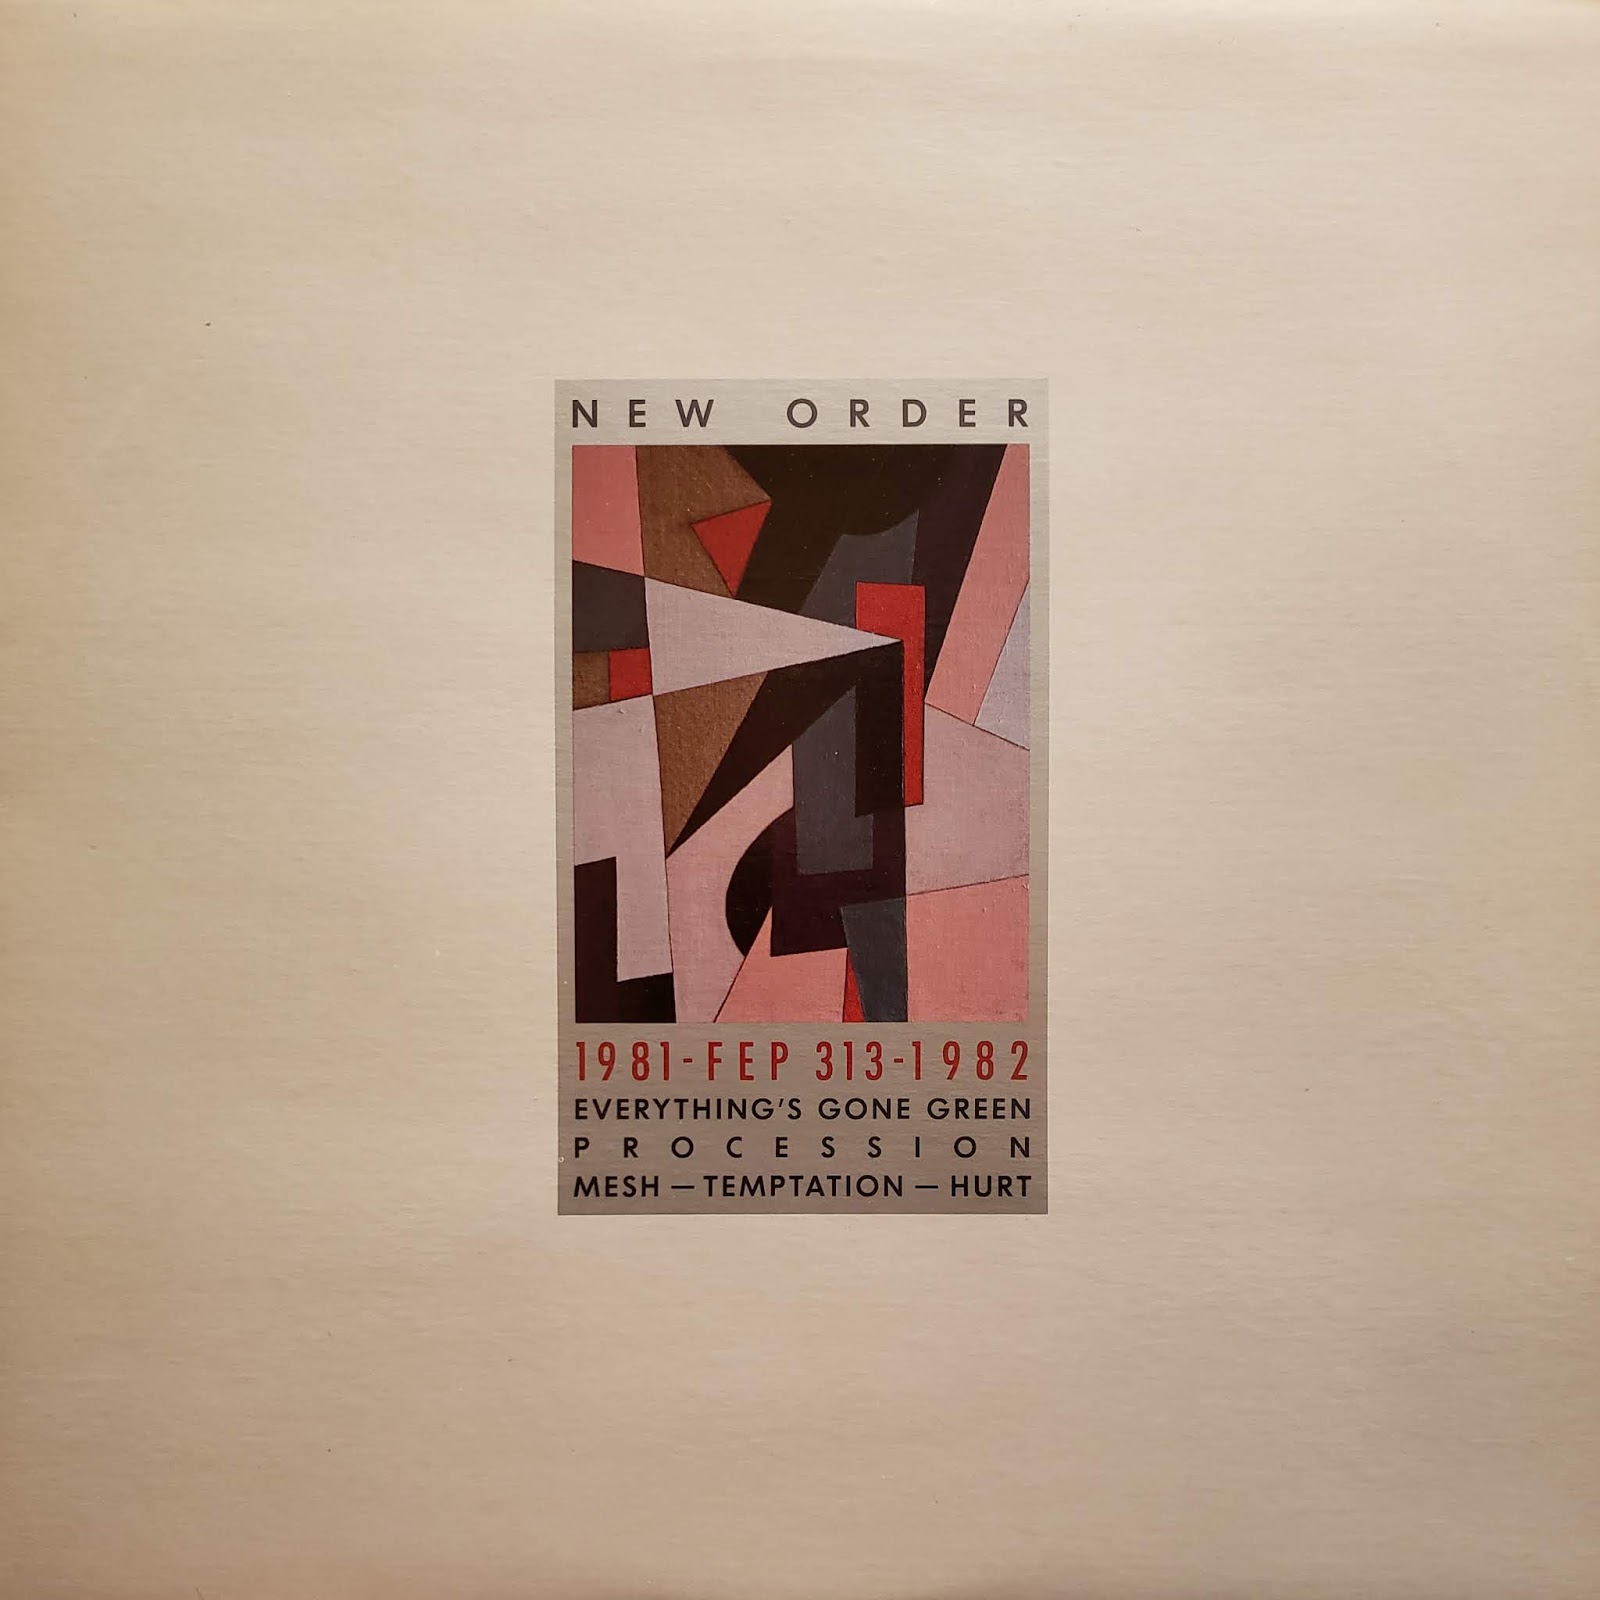 New Order: 1981-1982 EP (1982)